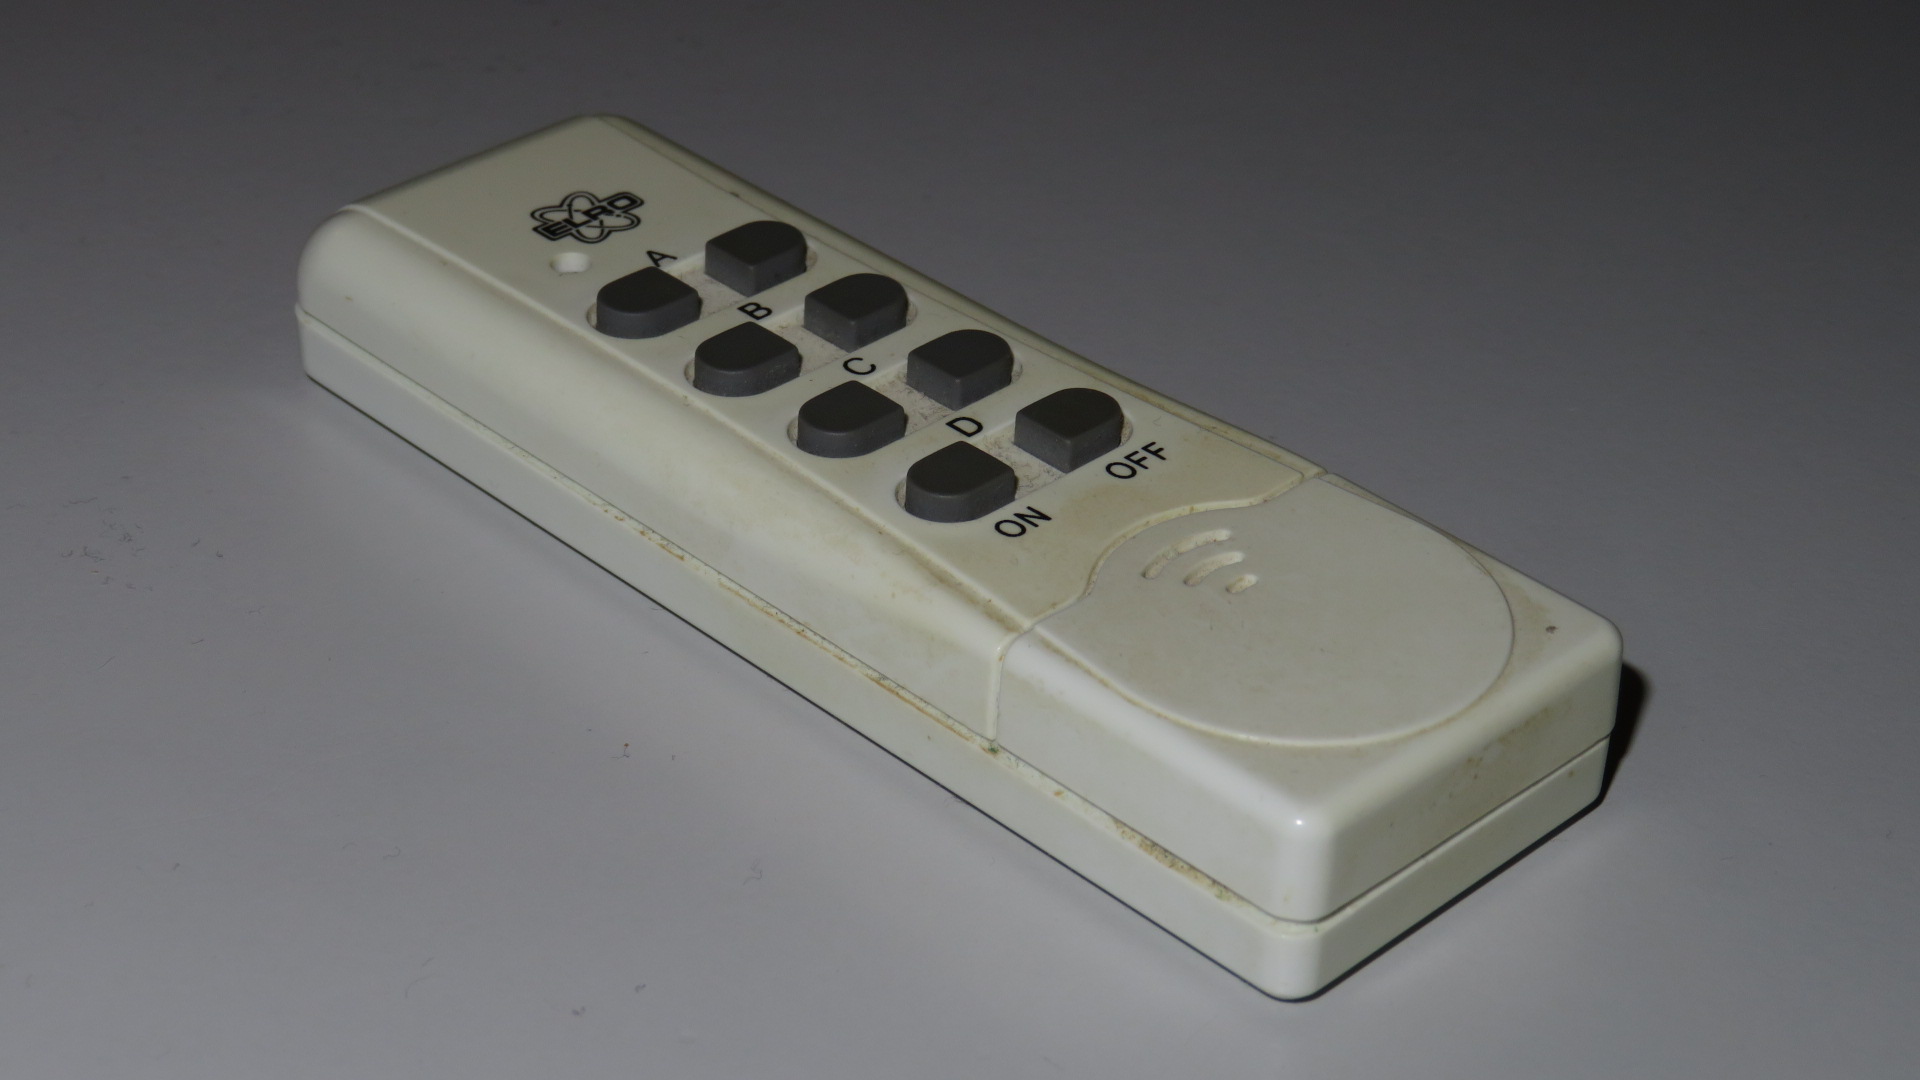 Old RF 433 MHz remote control